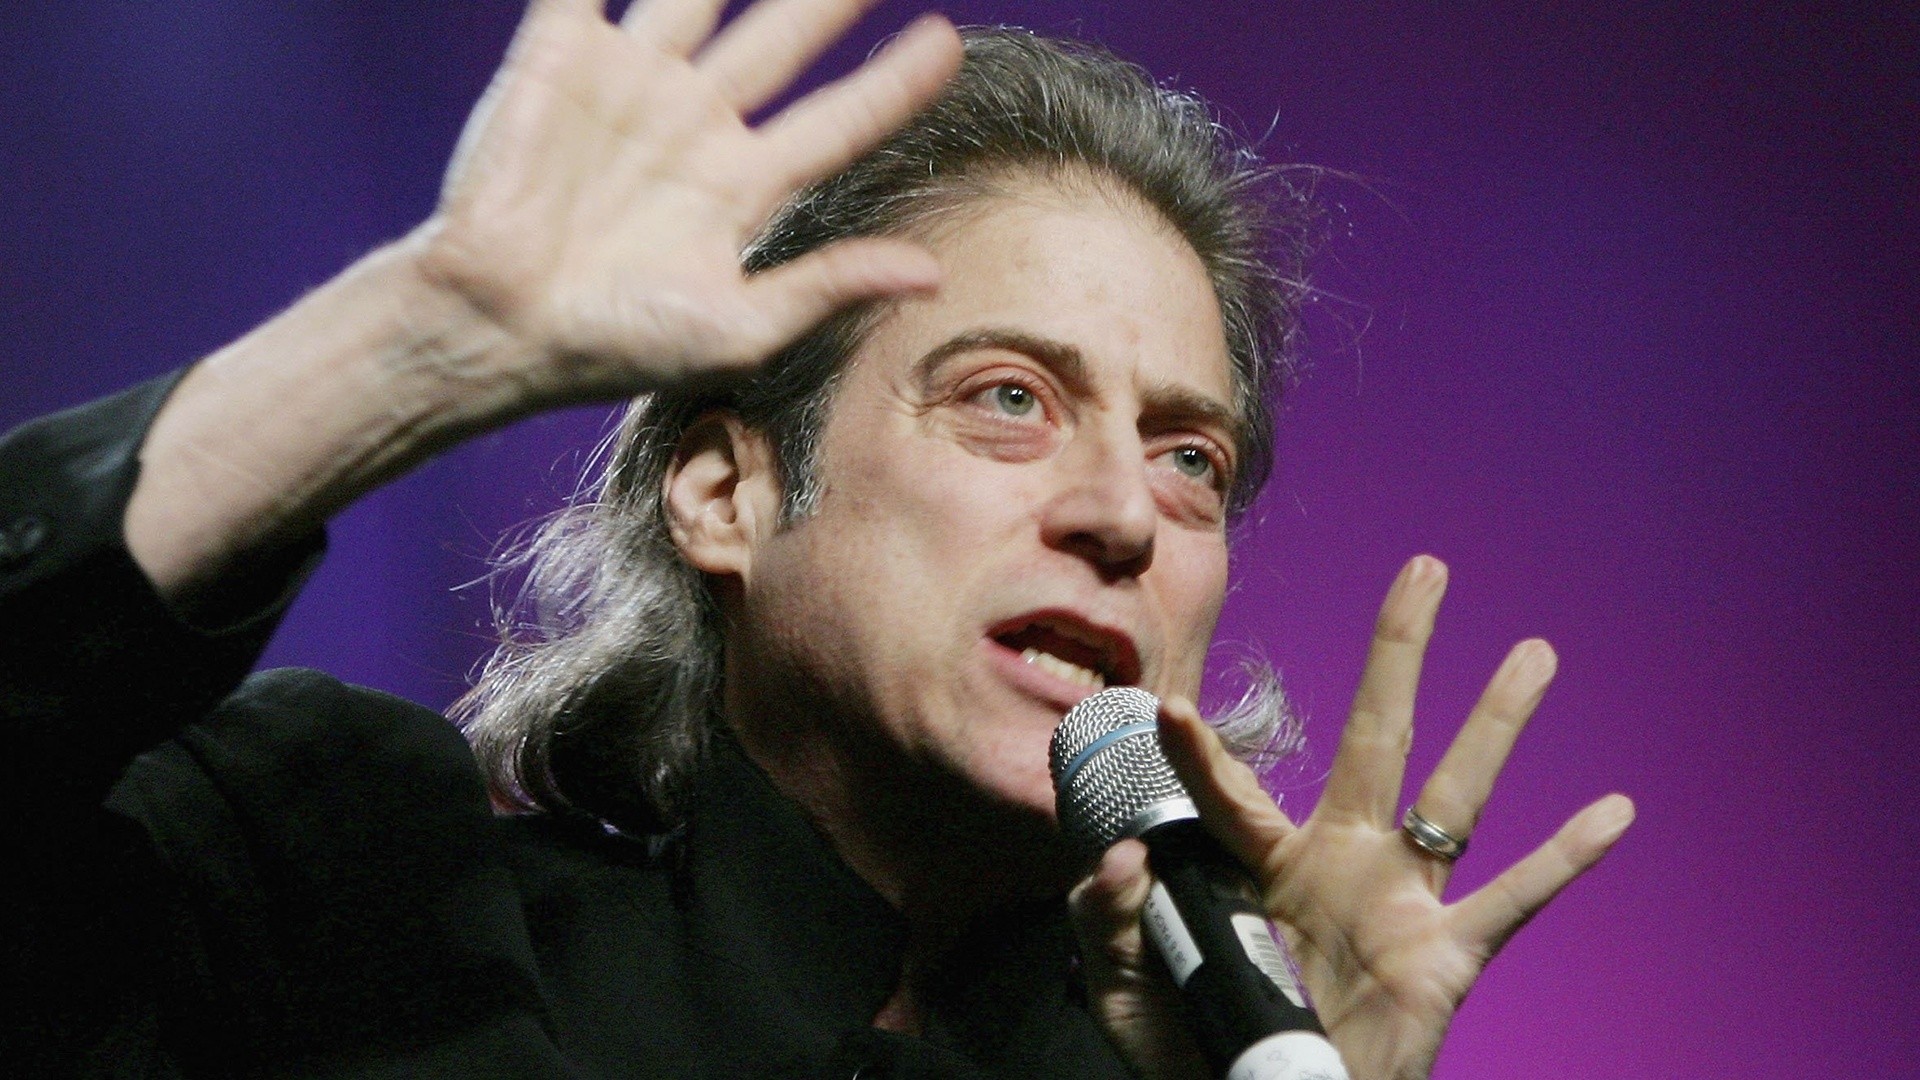 Richard Lewis, legendary comedian and star of 'Curb,' dies at 76